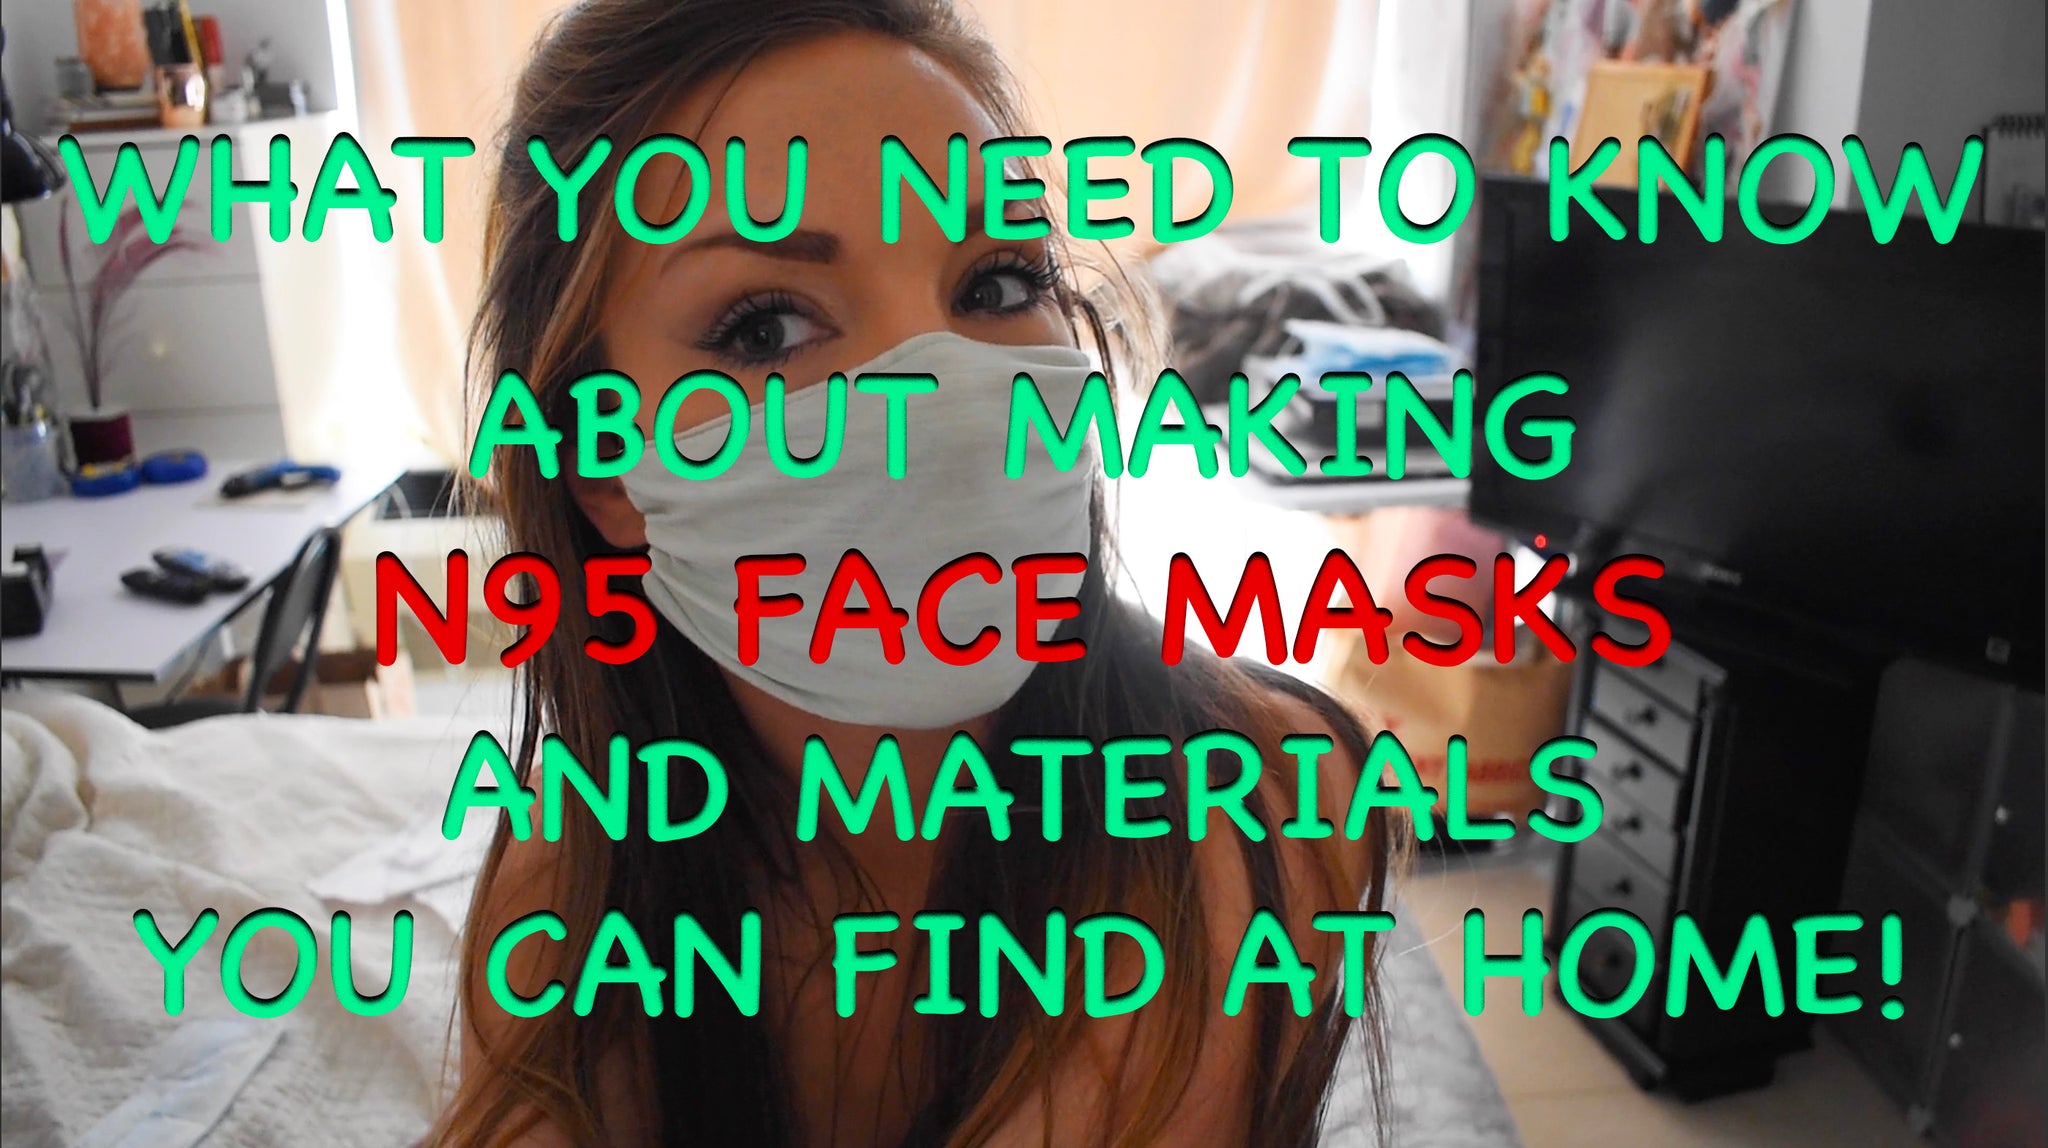 School Girl Dise Sex Xxxx - Make N95 Face Mask out of scientifically tested household material â€“  KxLNewYork